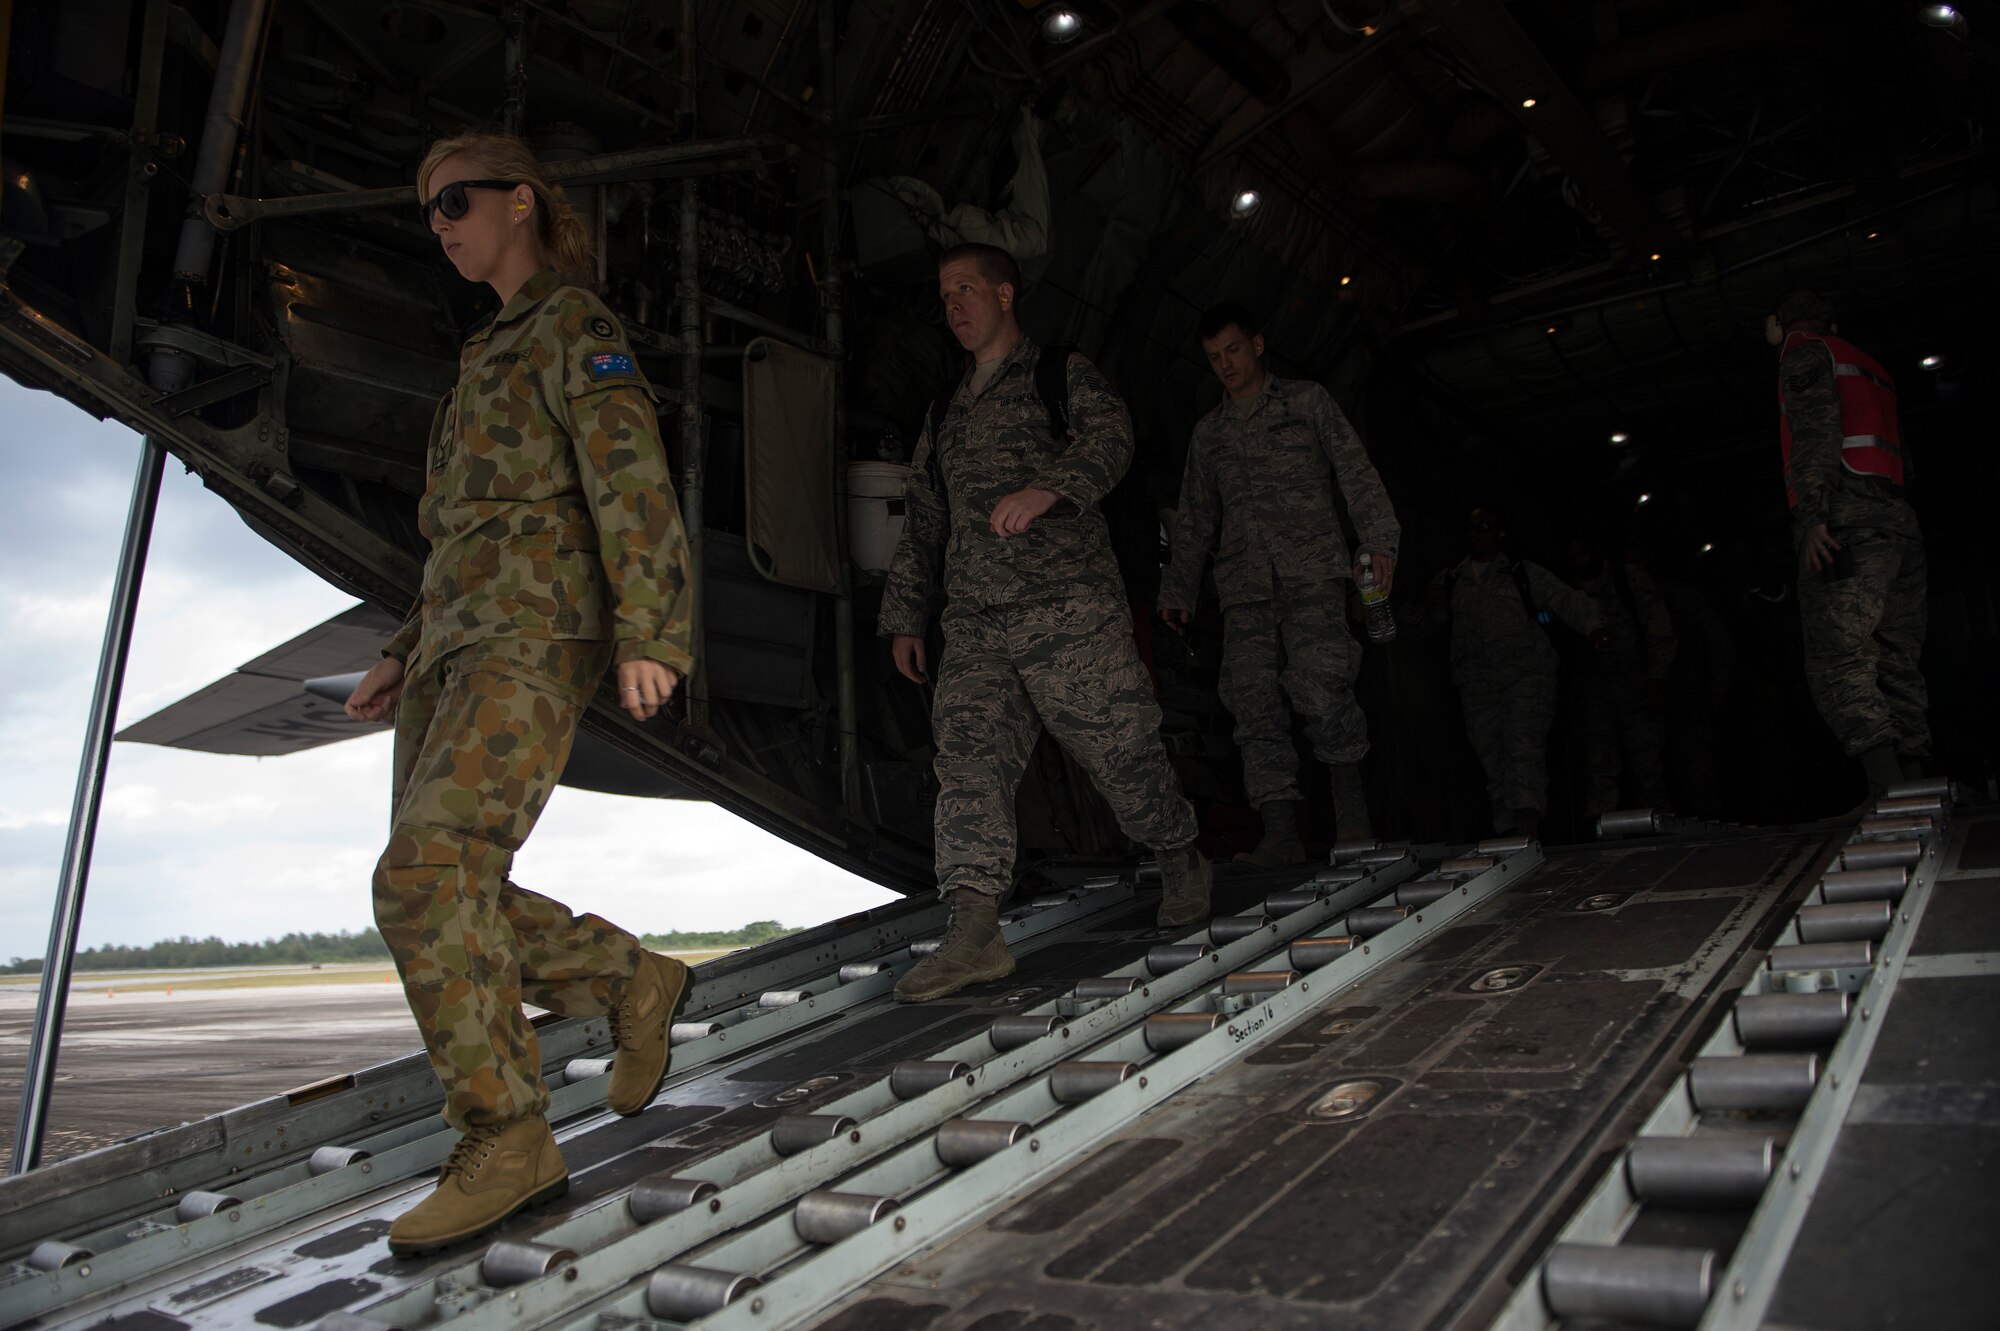 U.S. Air Force and Royal Australian Air Force Airmen walk off the ramp of a C-130 Hercules aircraft while participating in a humanitarian assistance and disaster relief training event at exercise COPE NORTH 15 at Rota at Northern Mariana Islands, Feb. 15, 2015. Exercise CN 15 enhances humanitarian assistance and disaster relief crisis response capabilities between six nations and lays the foundation for regional cooperation expansion during real-world contingencies in the Asia-Pacific Region. (U.S. Air Force photo by Tech. Sgt. Jason Robertson/Released)